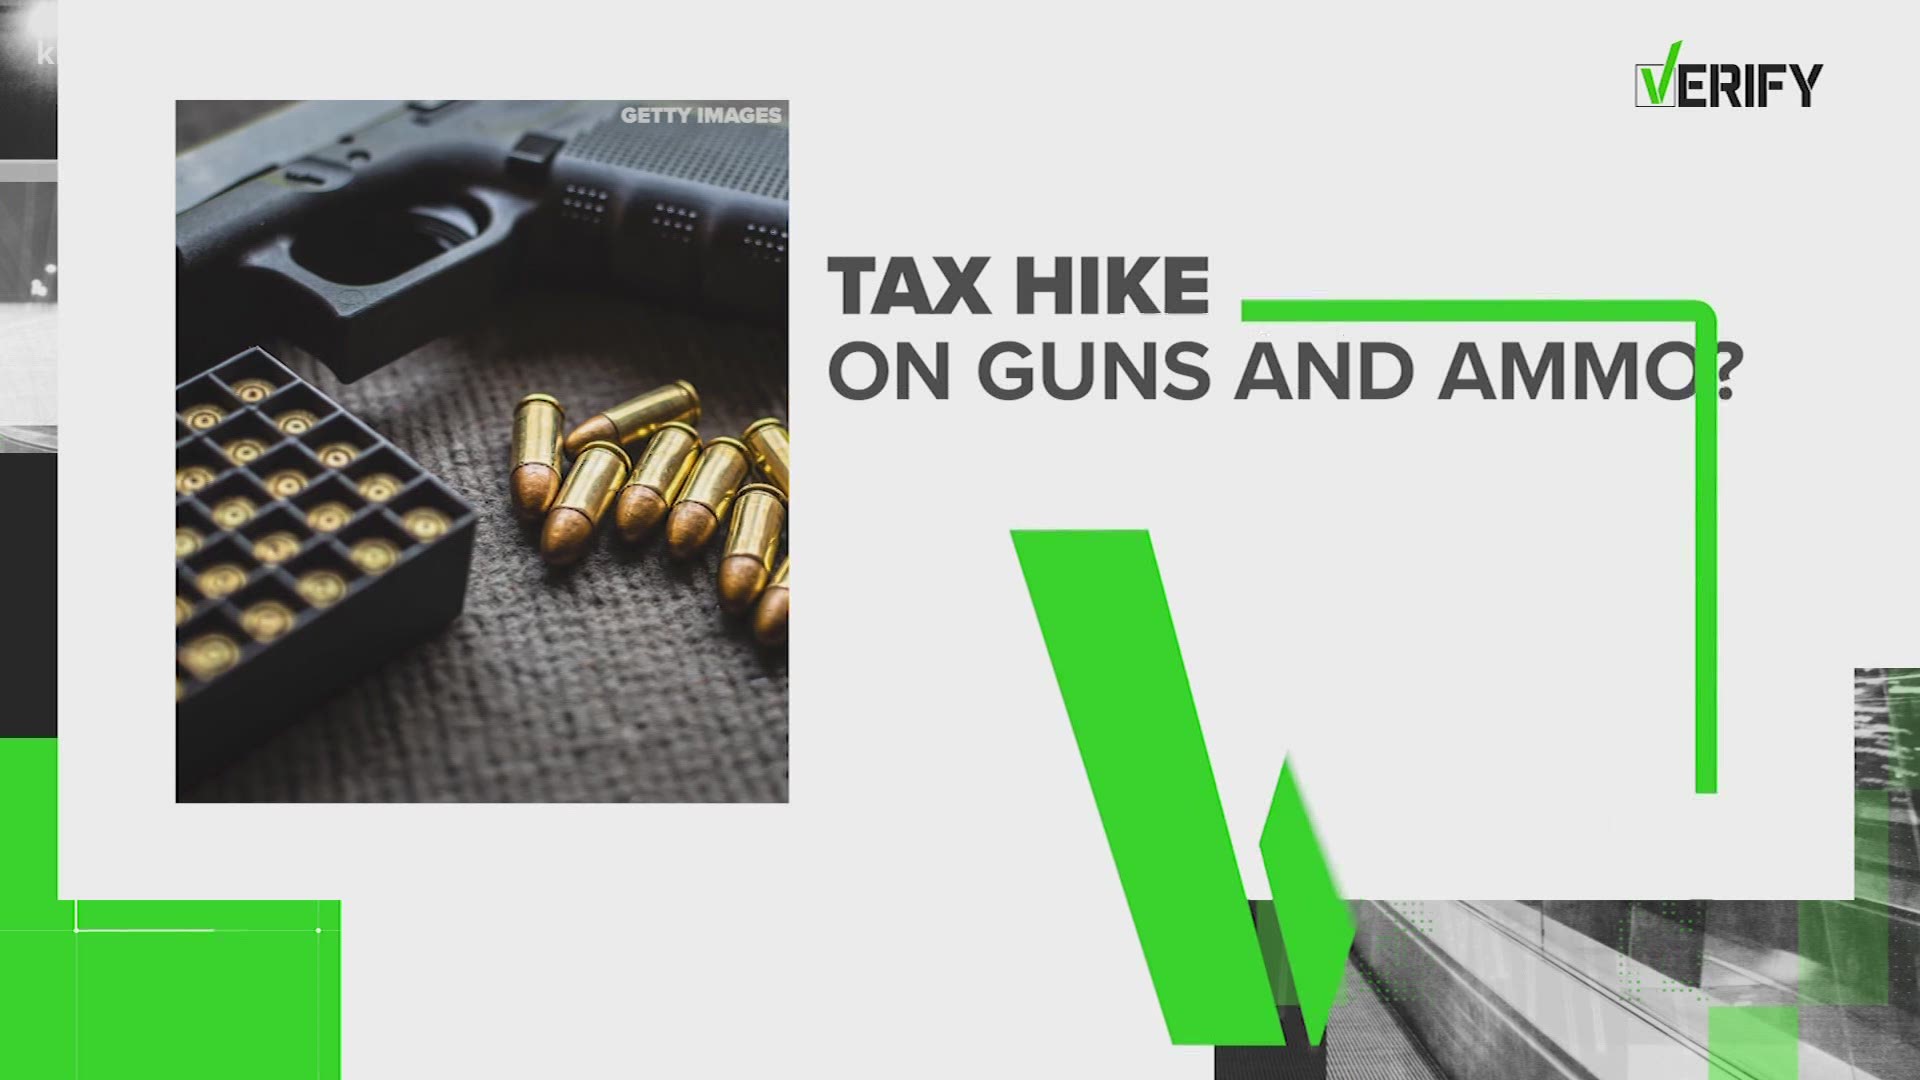 A post on social media claims during this pandemic, some lawmakers are trying to sneak in a bill that would raise taxes on guns and ammunition.